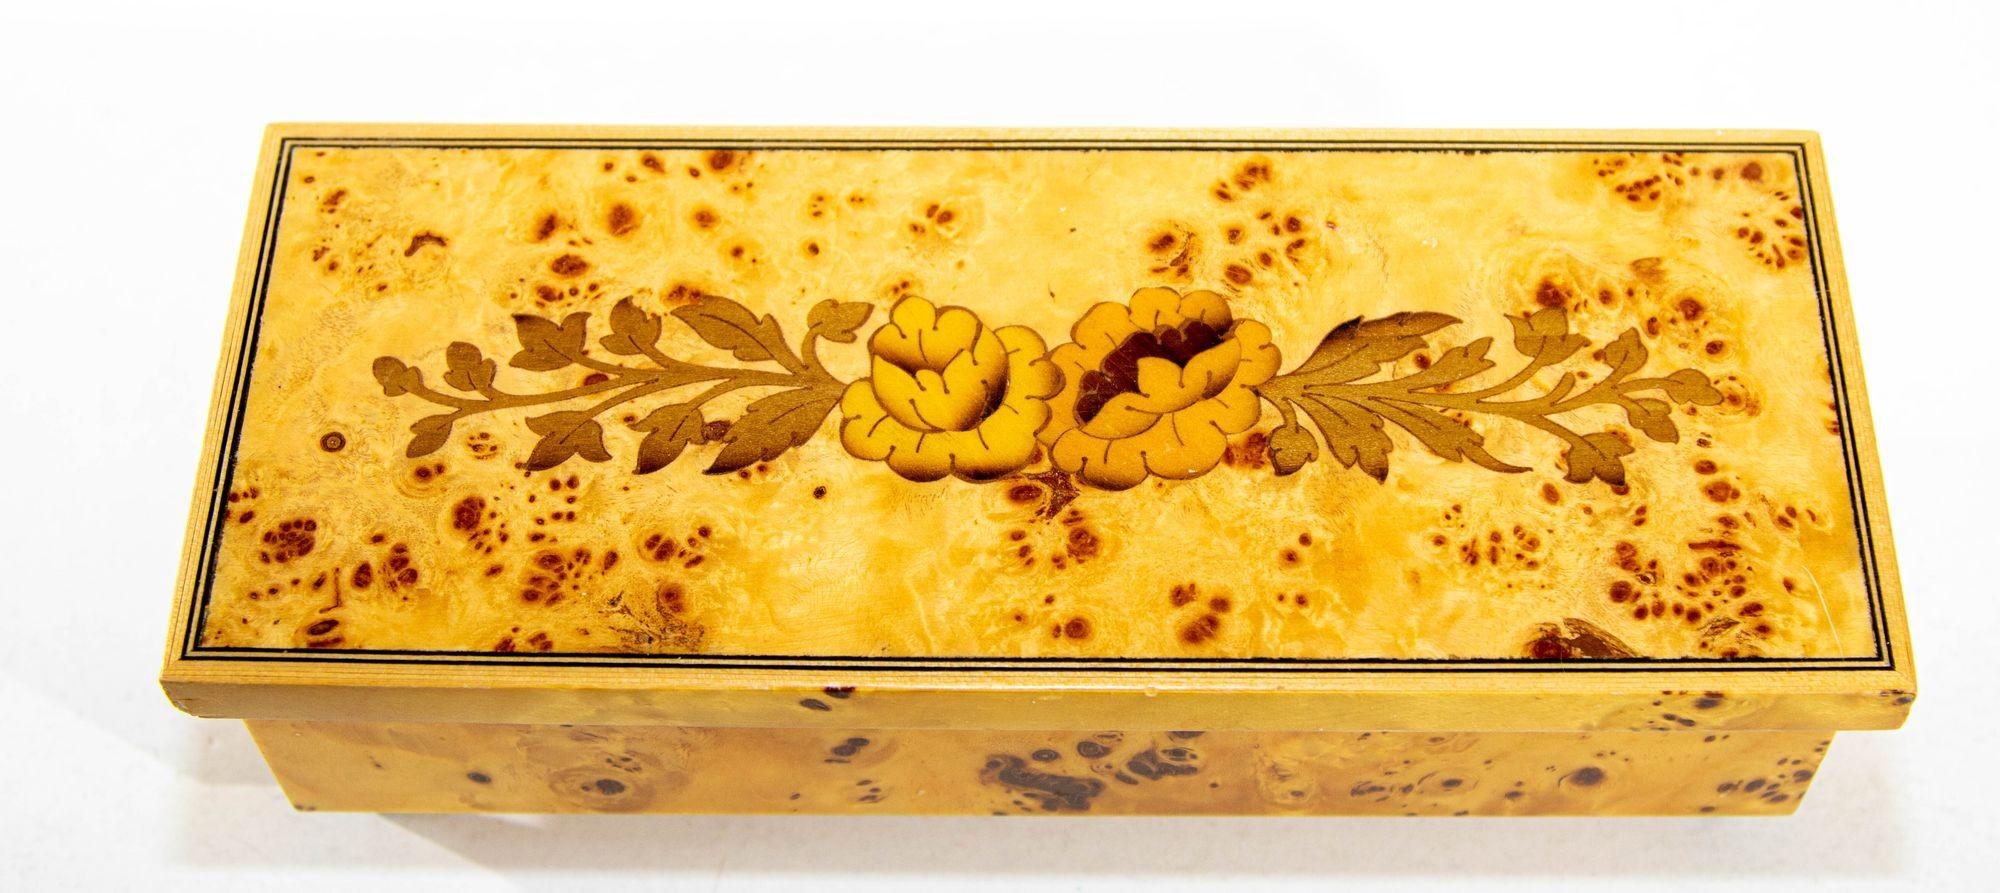 Vintage Italian Sorrento Burl Wood Jewelry Box Music Box.1960s/Italian Sorrento natural burl wood musical jewelry box.A beautif vintage Italian lacquered box with lovely floral marquetry inlaid detail. This is a lovely jewelry music box that is red